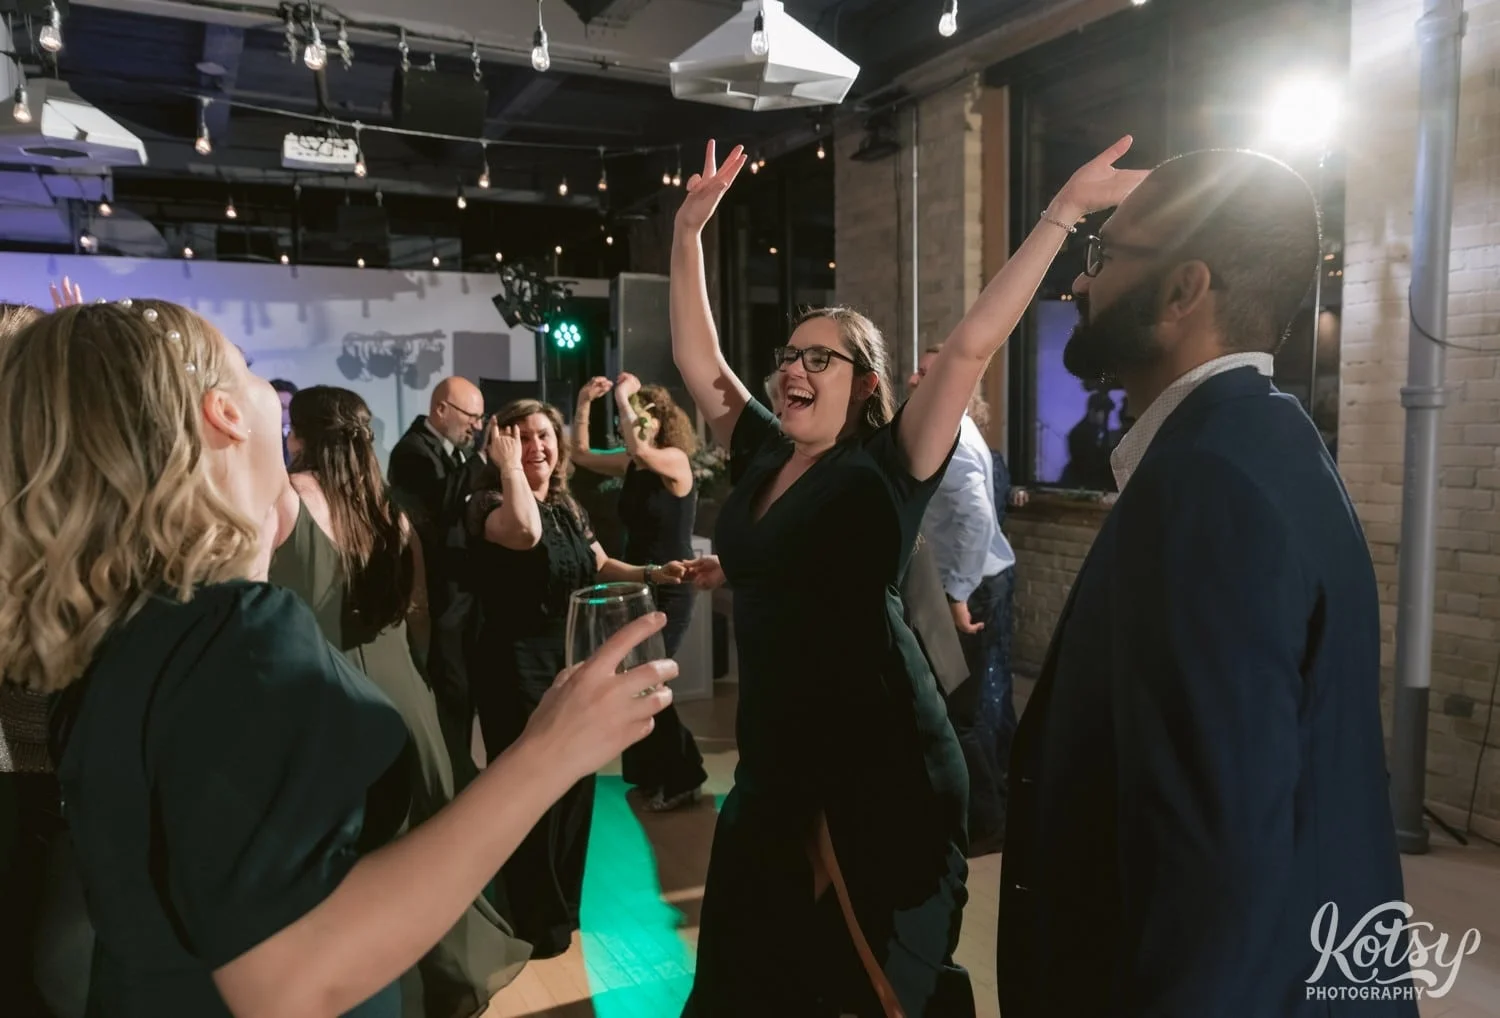 A woman in a green dress dances with her hands high in the air in a group of people during a Second Floor Events wedding reception in Toronto, Canada.